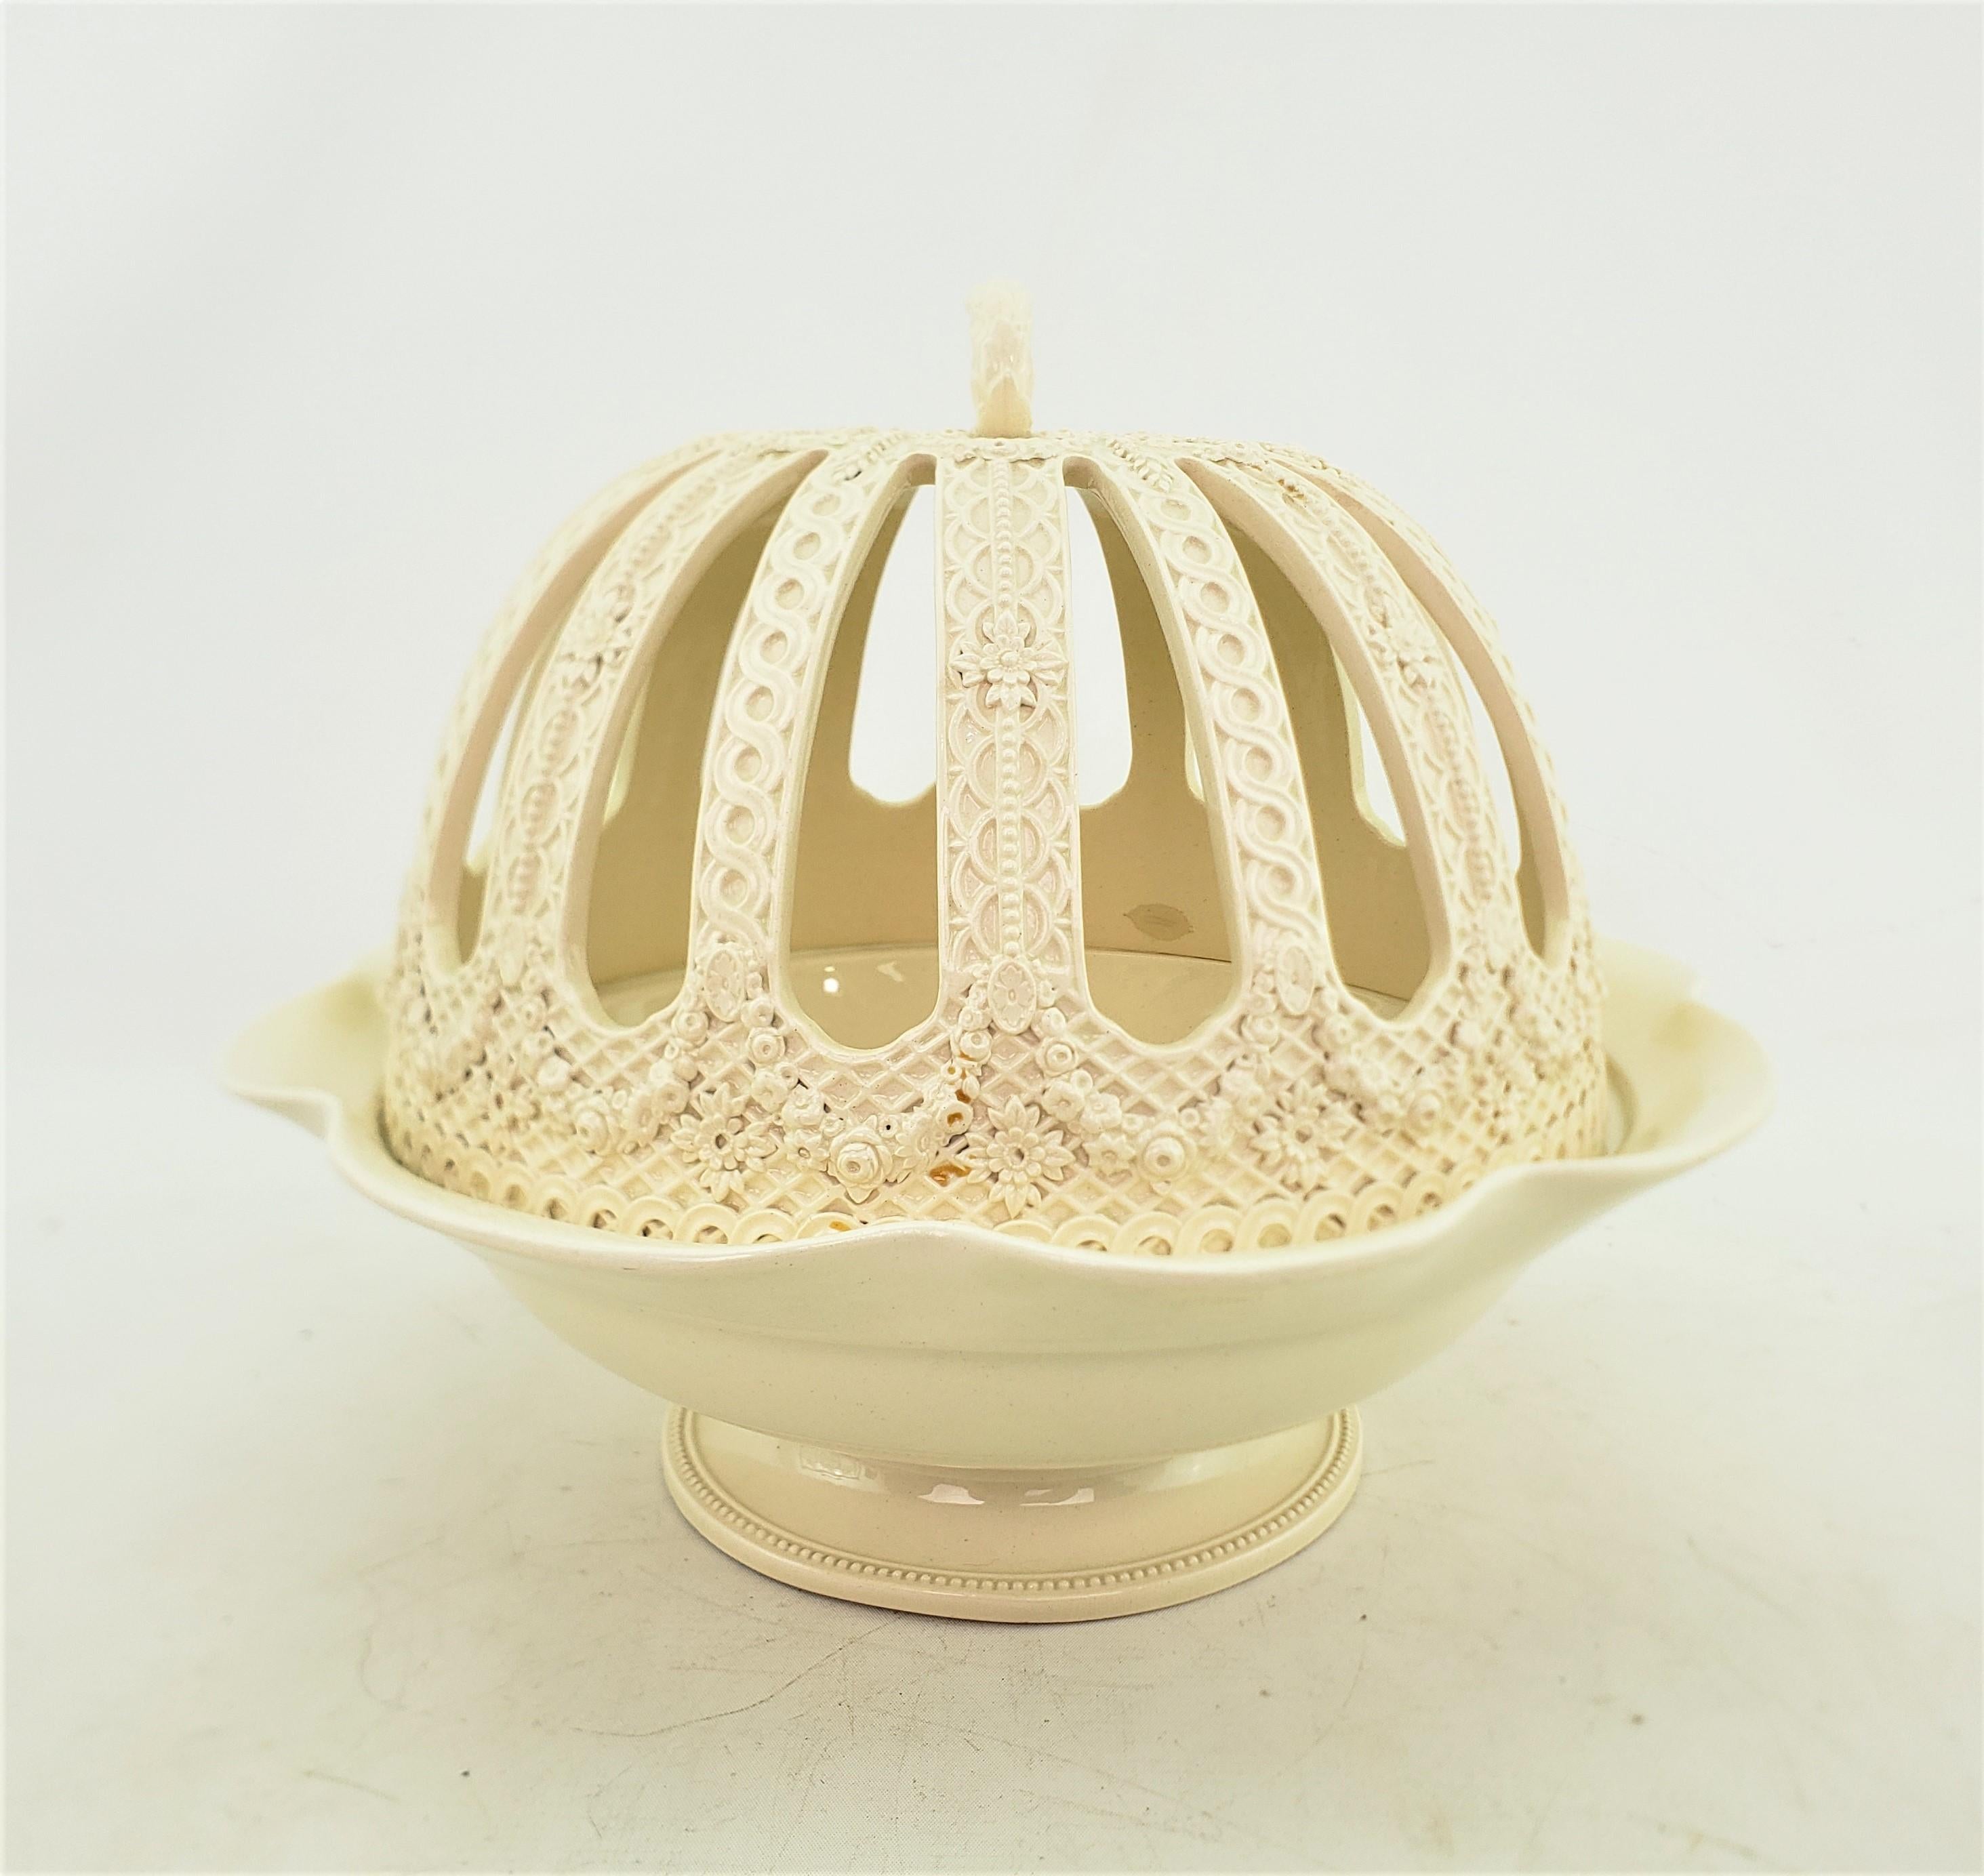 Glazed Antique Wedgwood Creamware or Queen's Ware Covered Orange Bowl For Sale